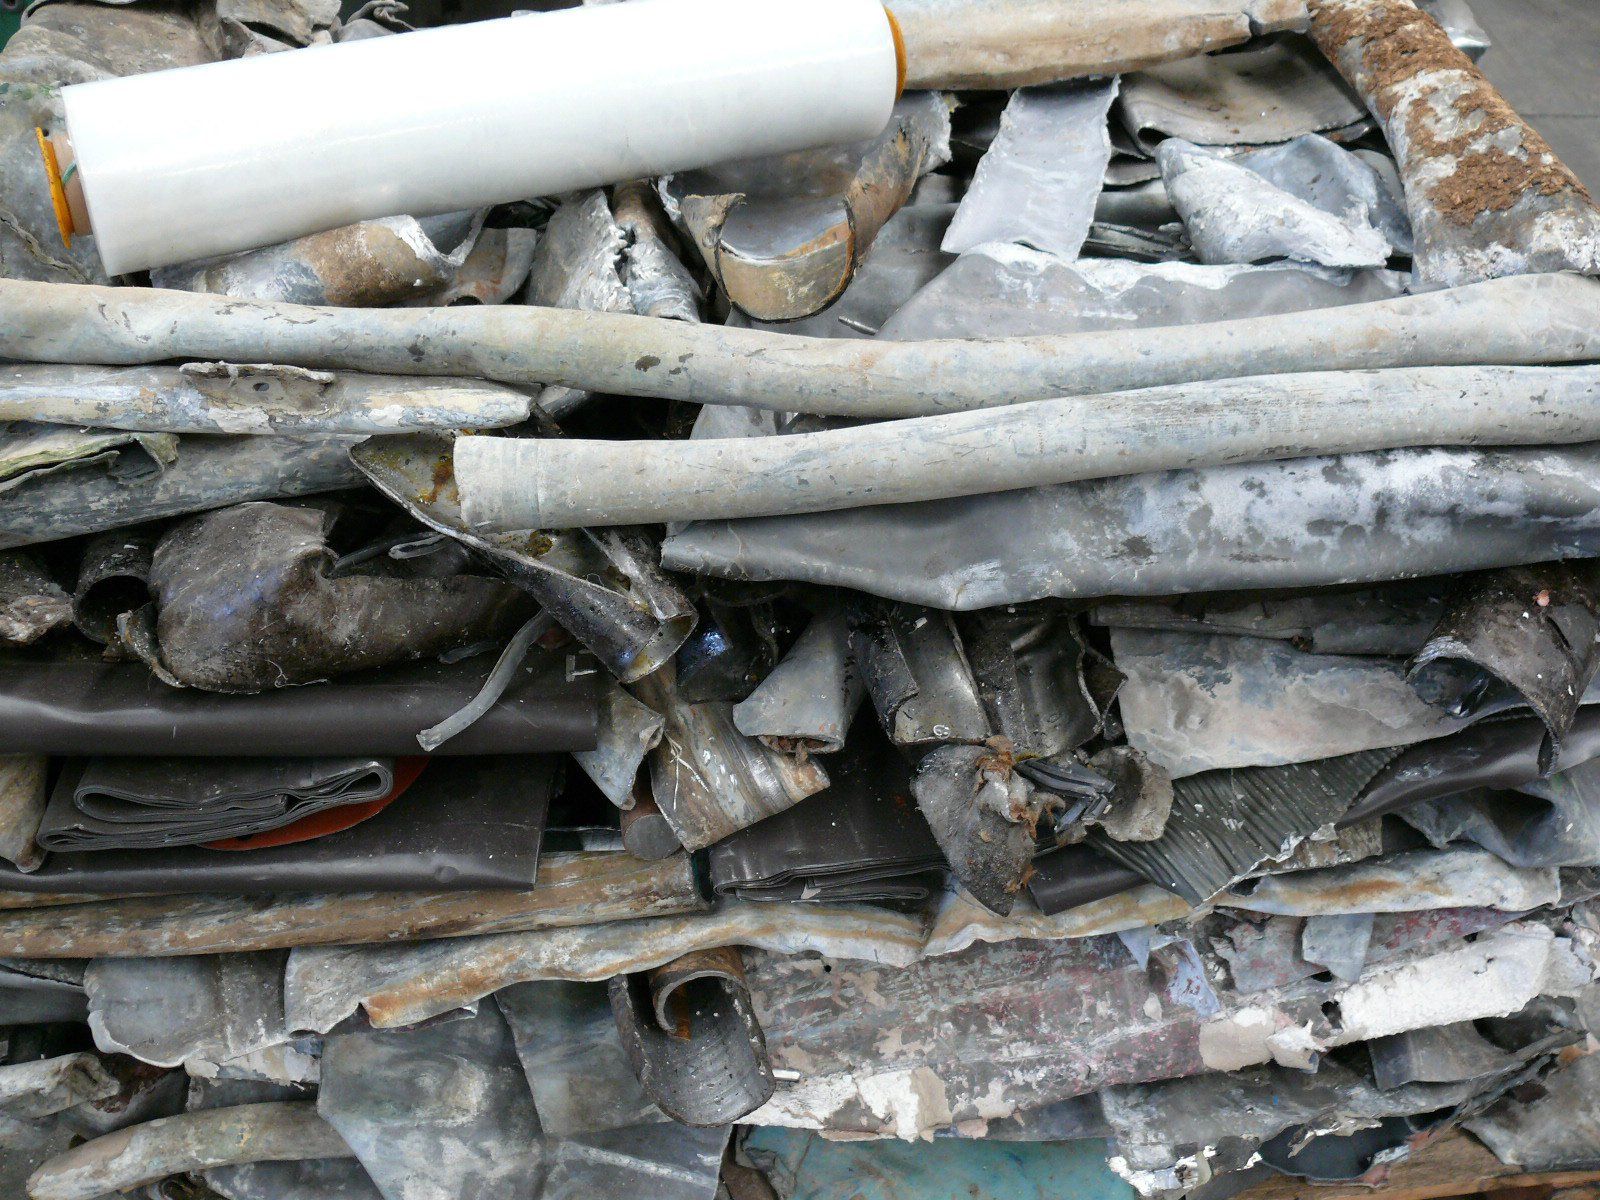 The scrap metal buyer and recycler for your needs in Auckland